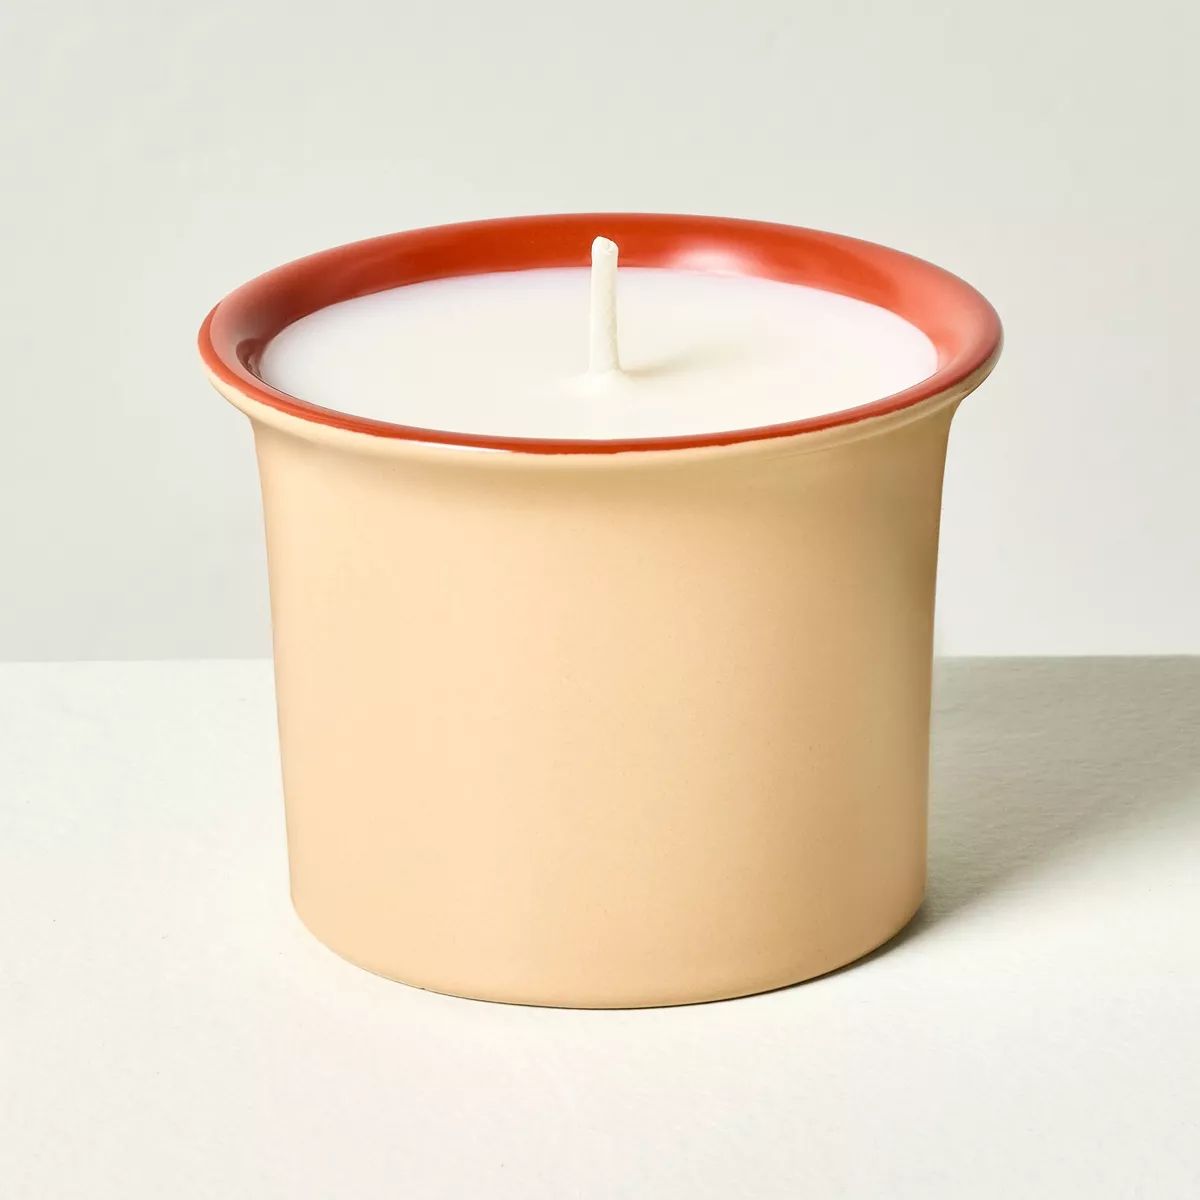 Two-Tone Ceramic Sunkissed Ginger Jar Candle 4.6oz Tan/Red - Hearth & Hand™ with Magnolia | Target